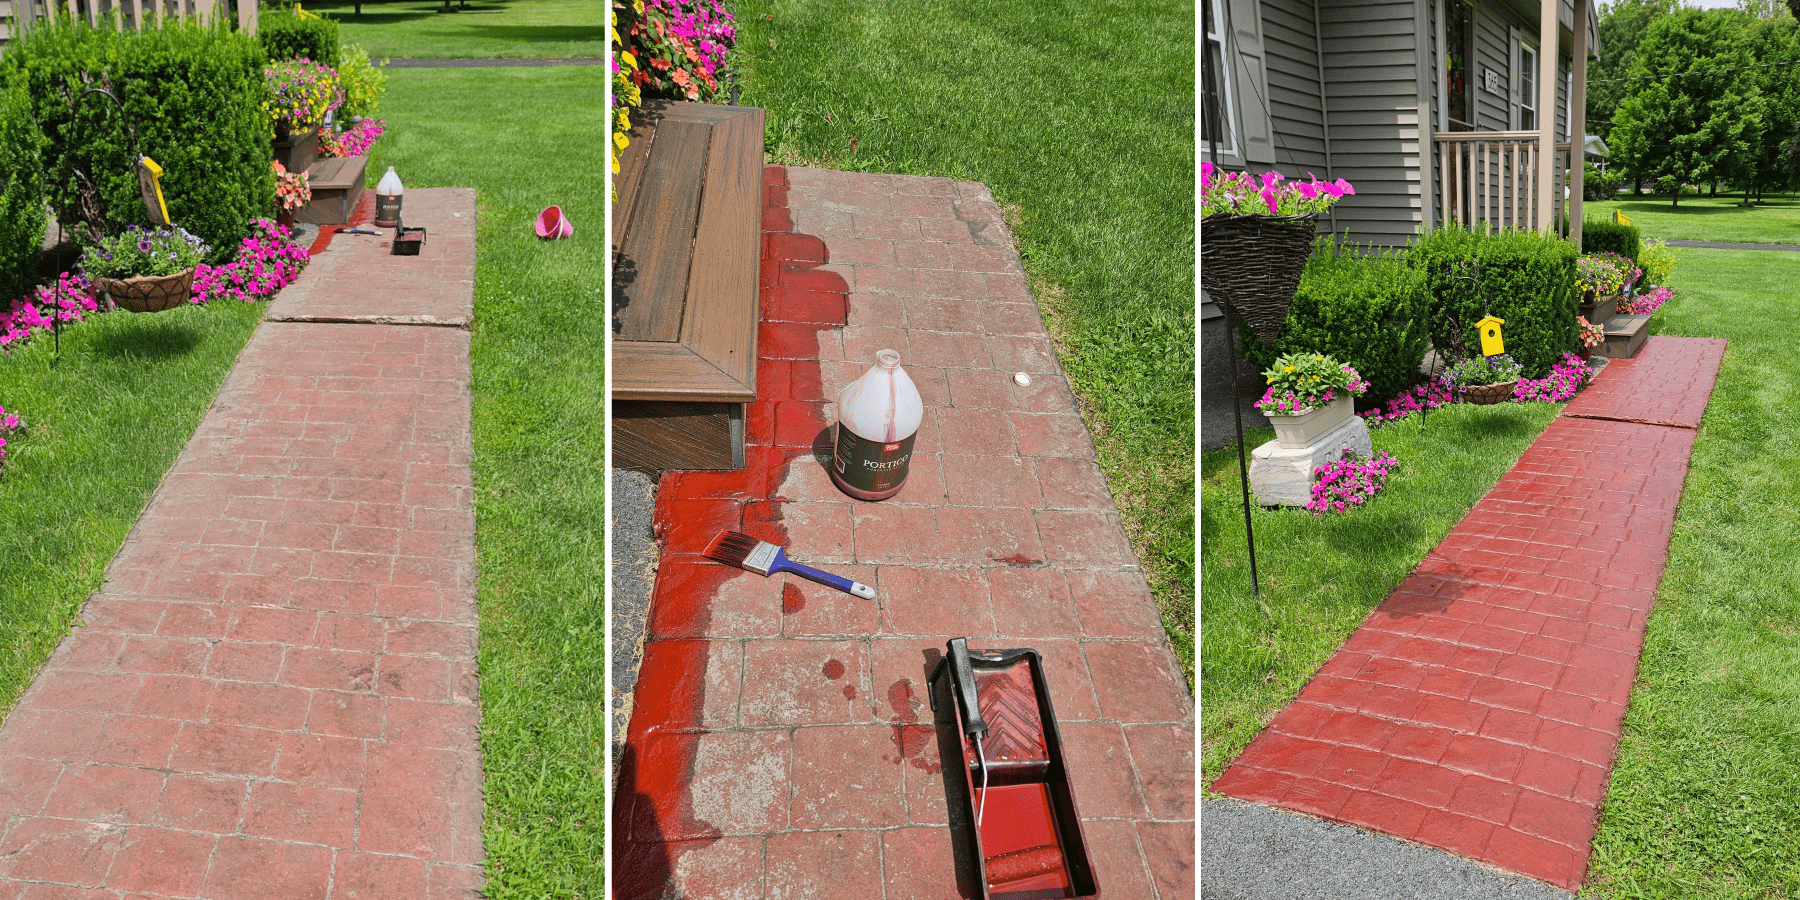 Transformation of a faded paver walkway through a DIY renovation project using a Portico paver stain